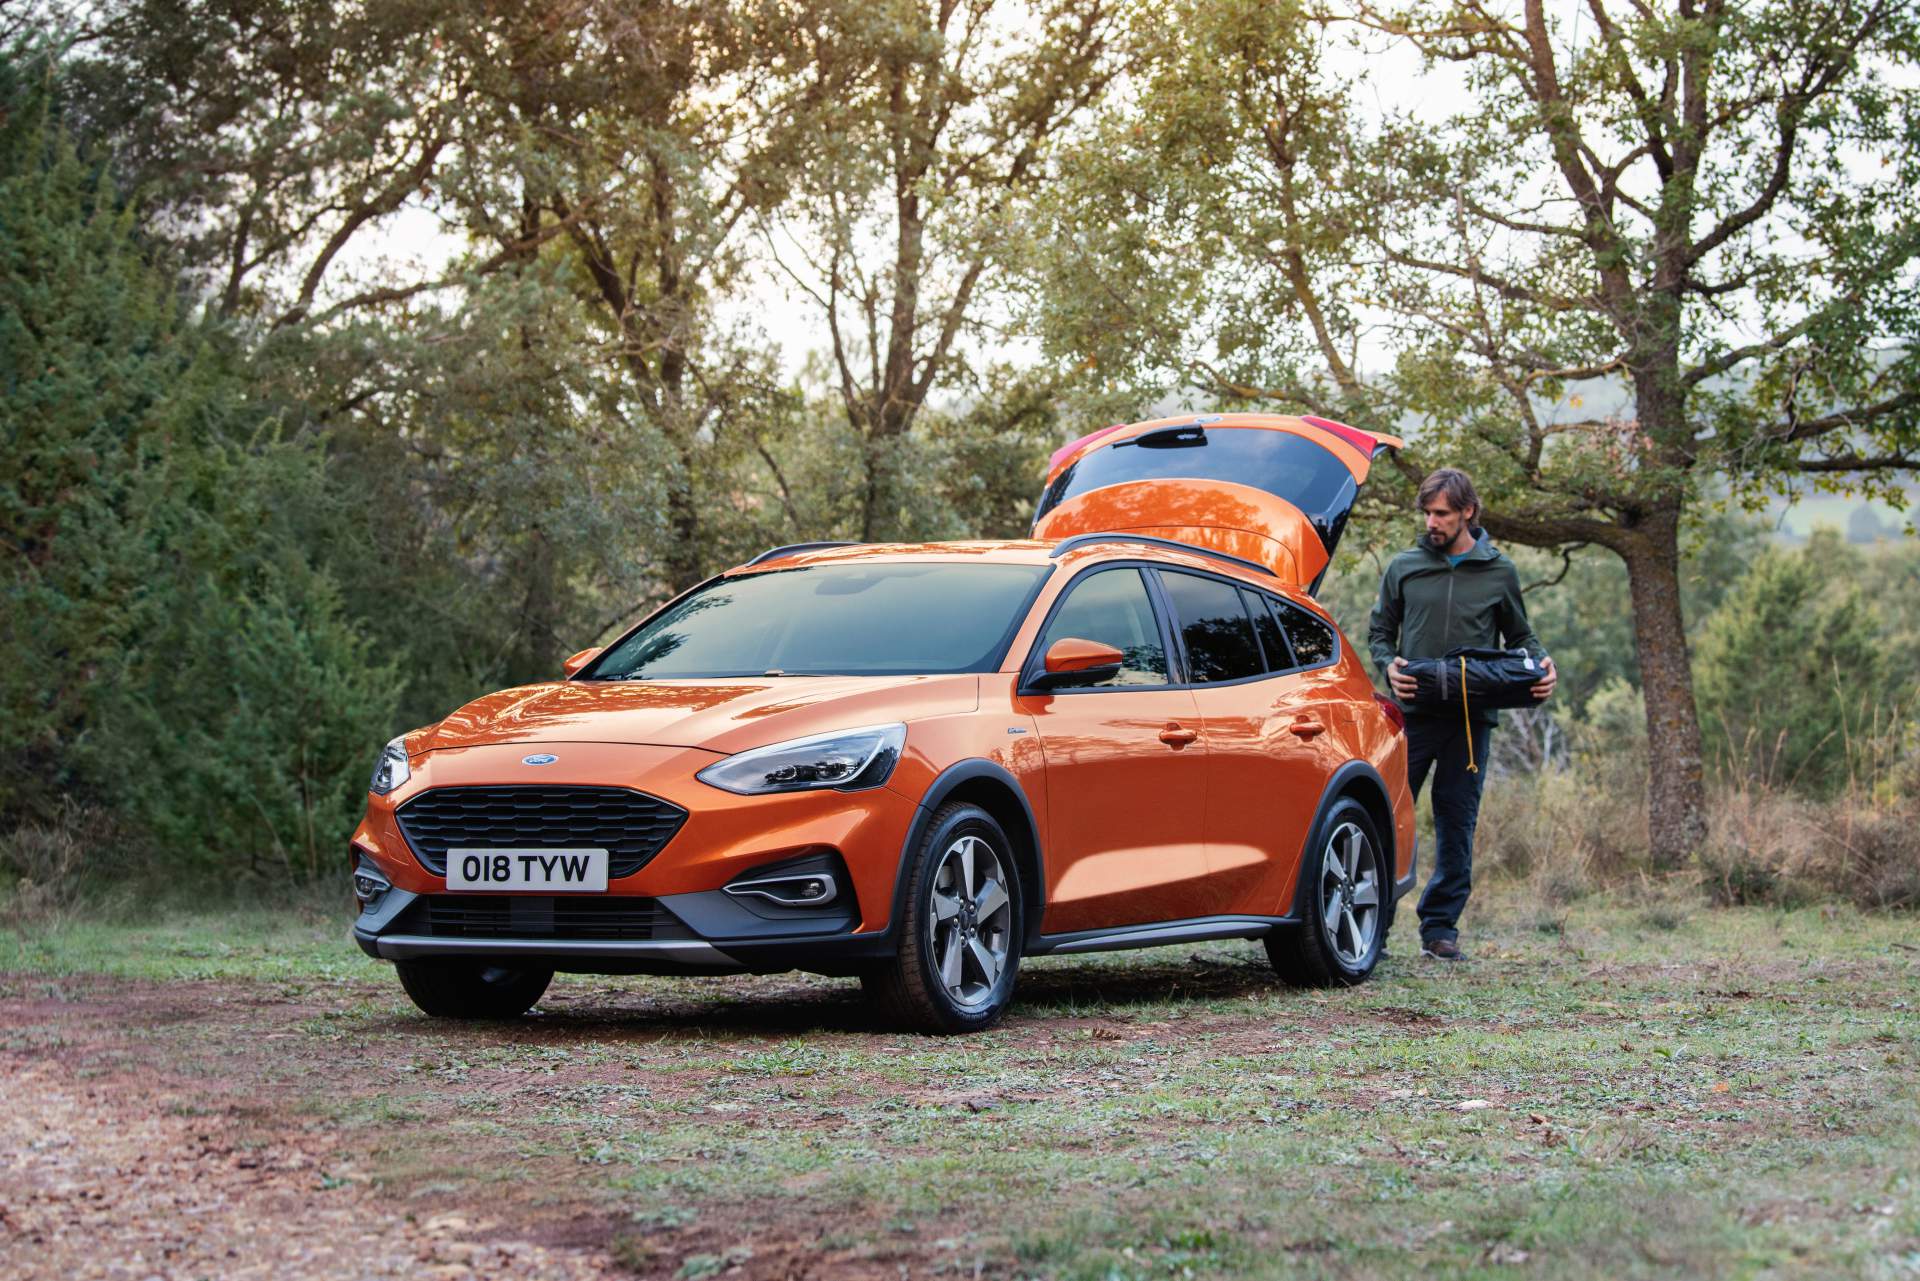 Ford Reveals Focus Active Wagon, Refers To It As “Crossover